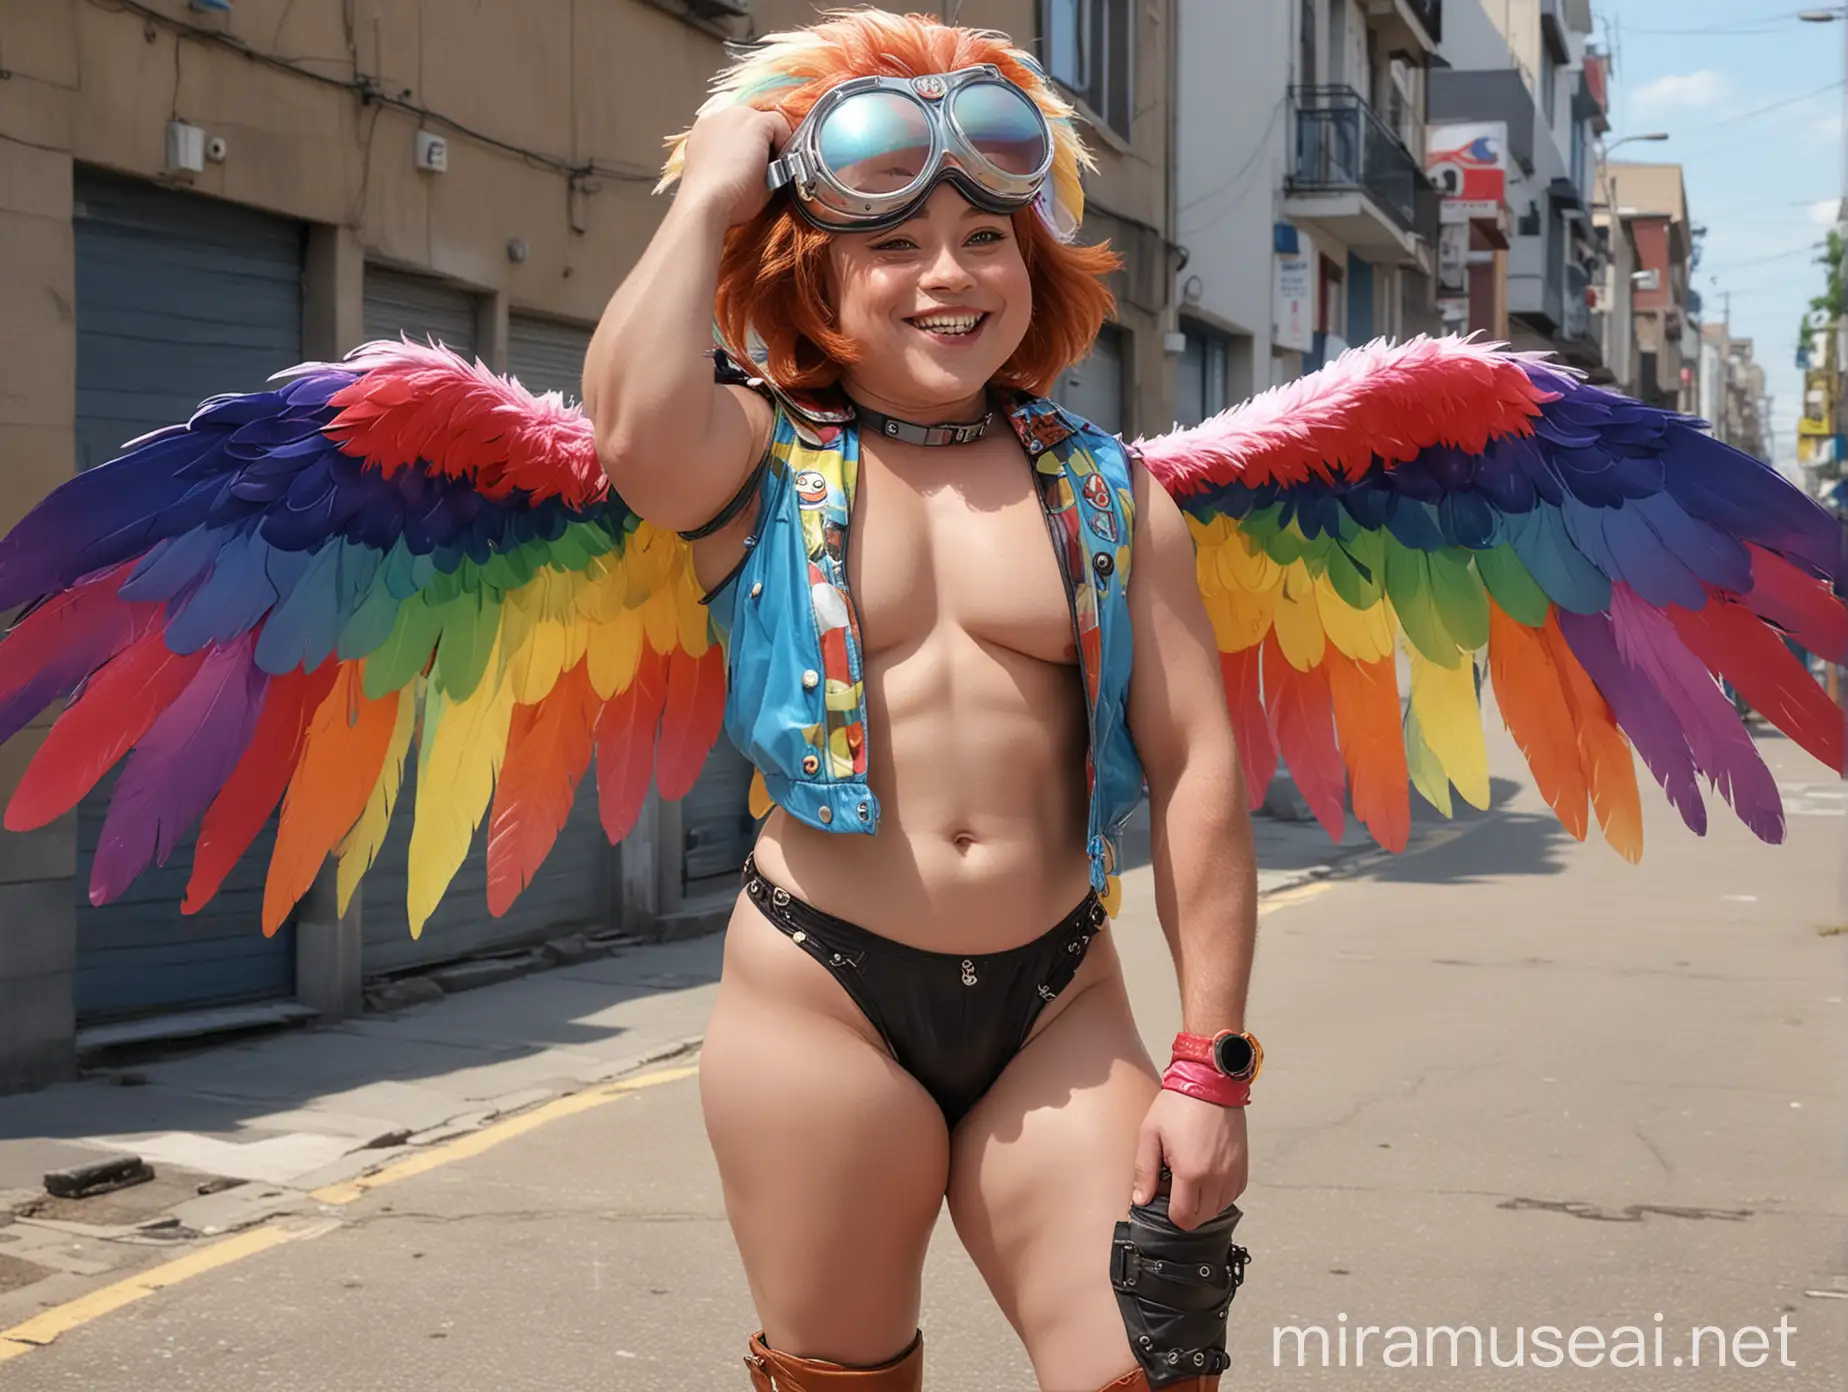 Topless 40s Ultra Chunky Subtle Smile Redhead Big Eyes Bodybuilder Daddy with Beard Wearing Multi-Highlighter Bright Rainbow Colored See Through huge Eagle Wings Shoulder Jacket short shorts low leather boots and Flexing his Big Strong Arm Up with Doraemon Goggles on forehead